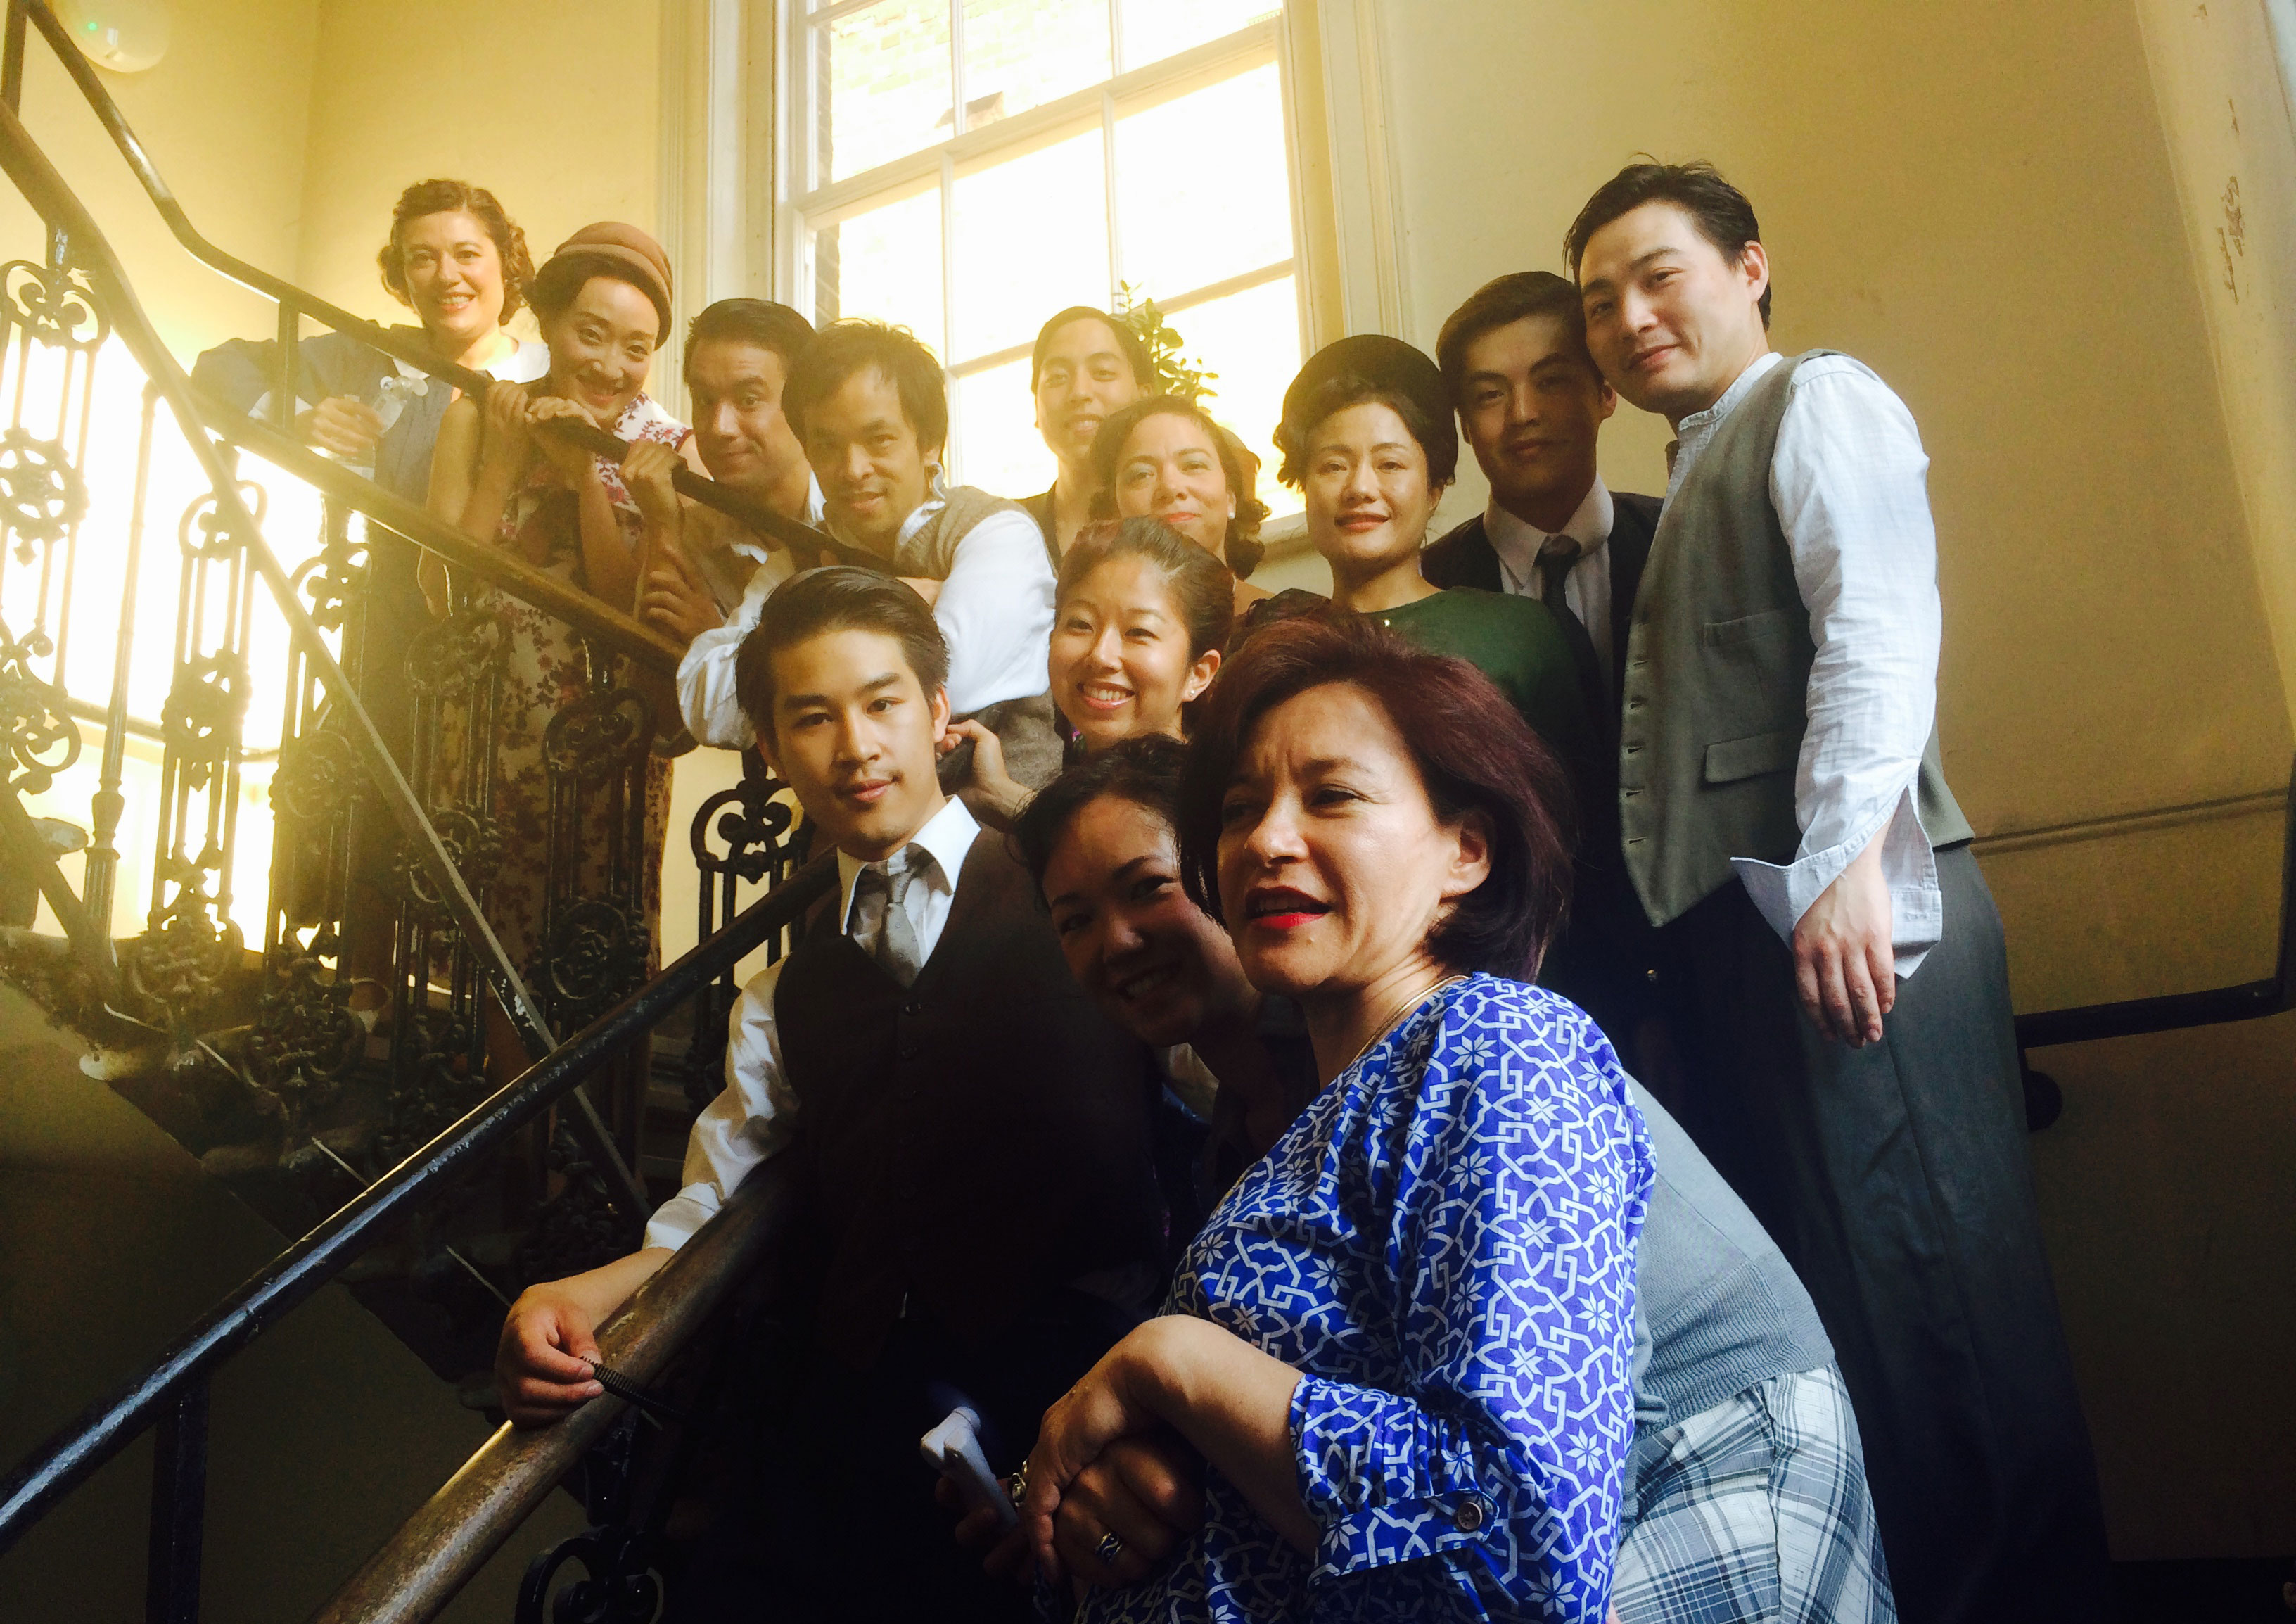 Kumiko Mendl with the cast of ‘The Last Days of Limehouse’ posing for a group photo on a stairway with wrought iron banisters.